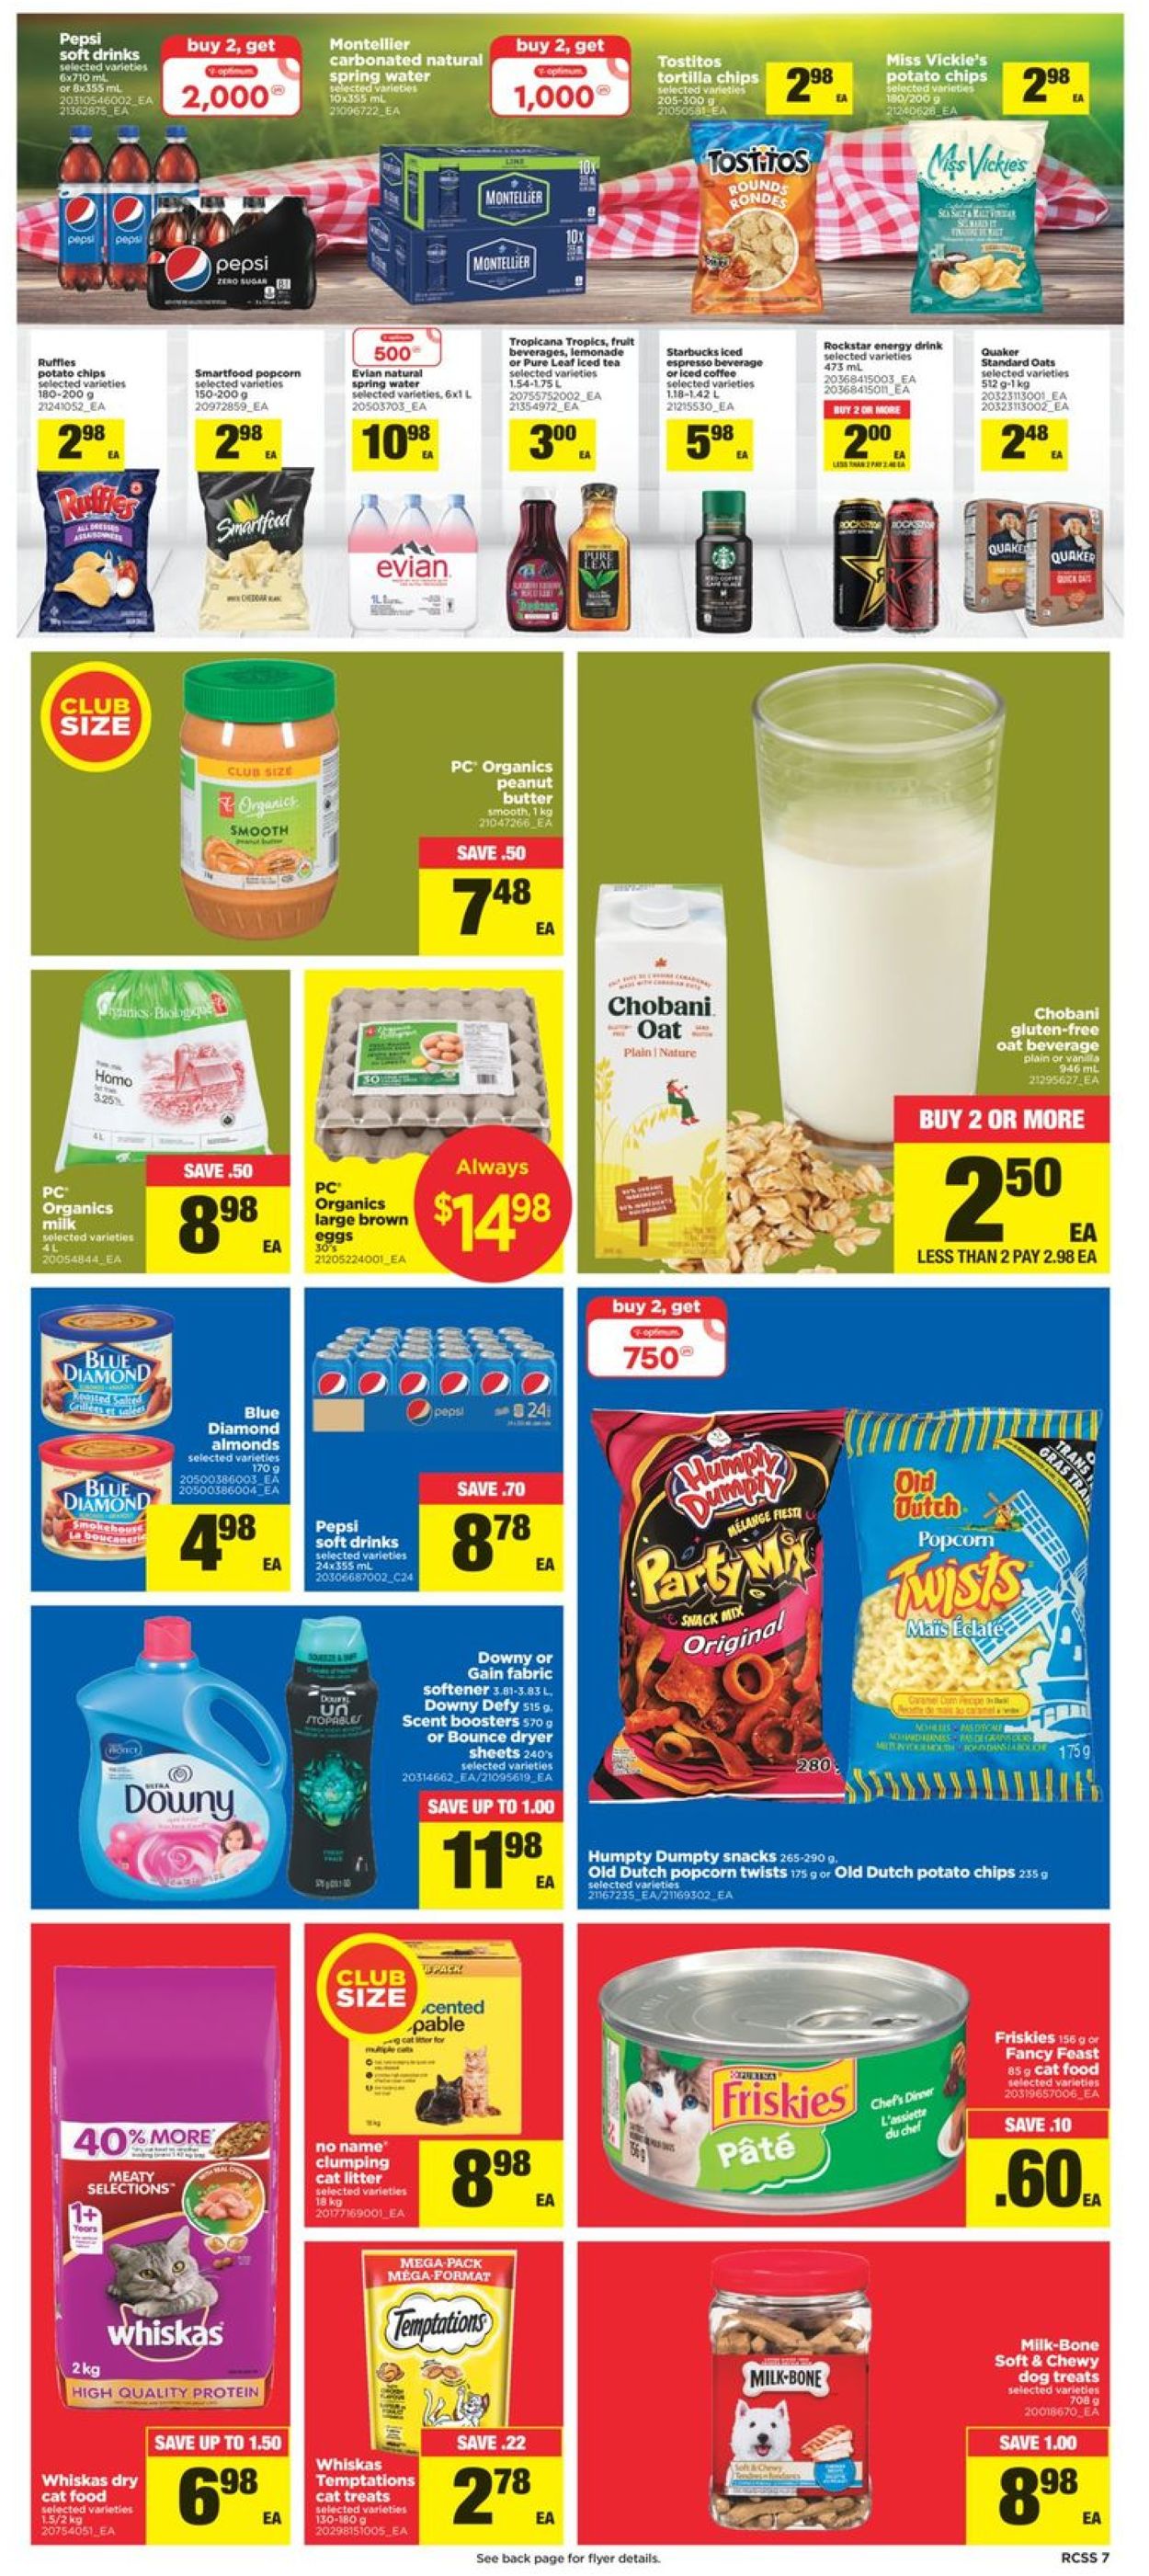 Real Canadian Superstore Flyer from 07/22/2021